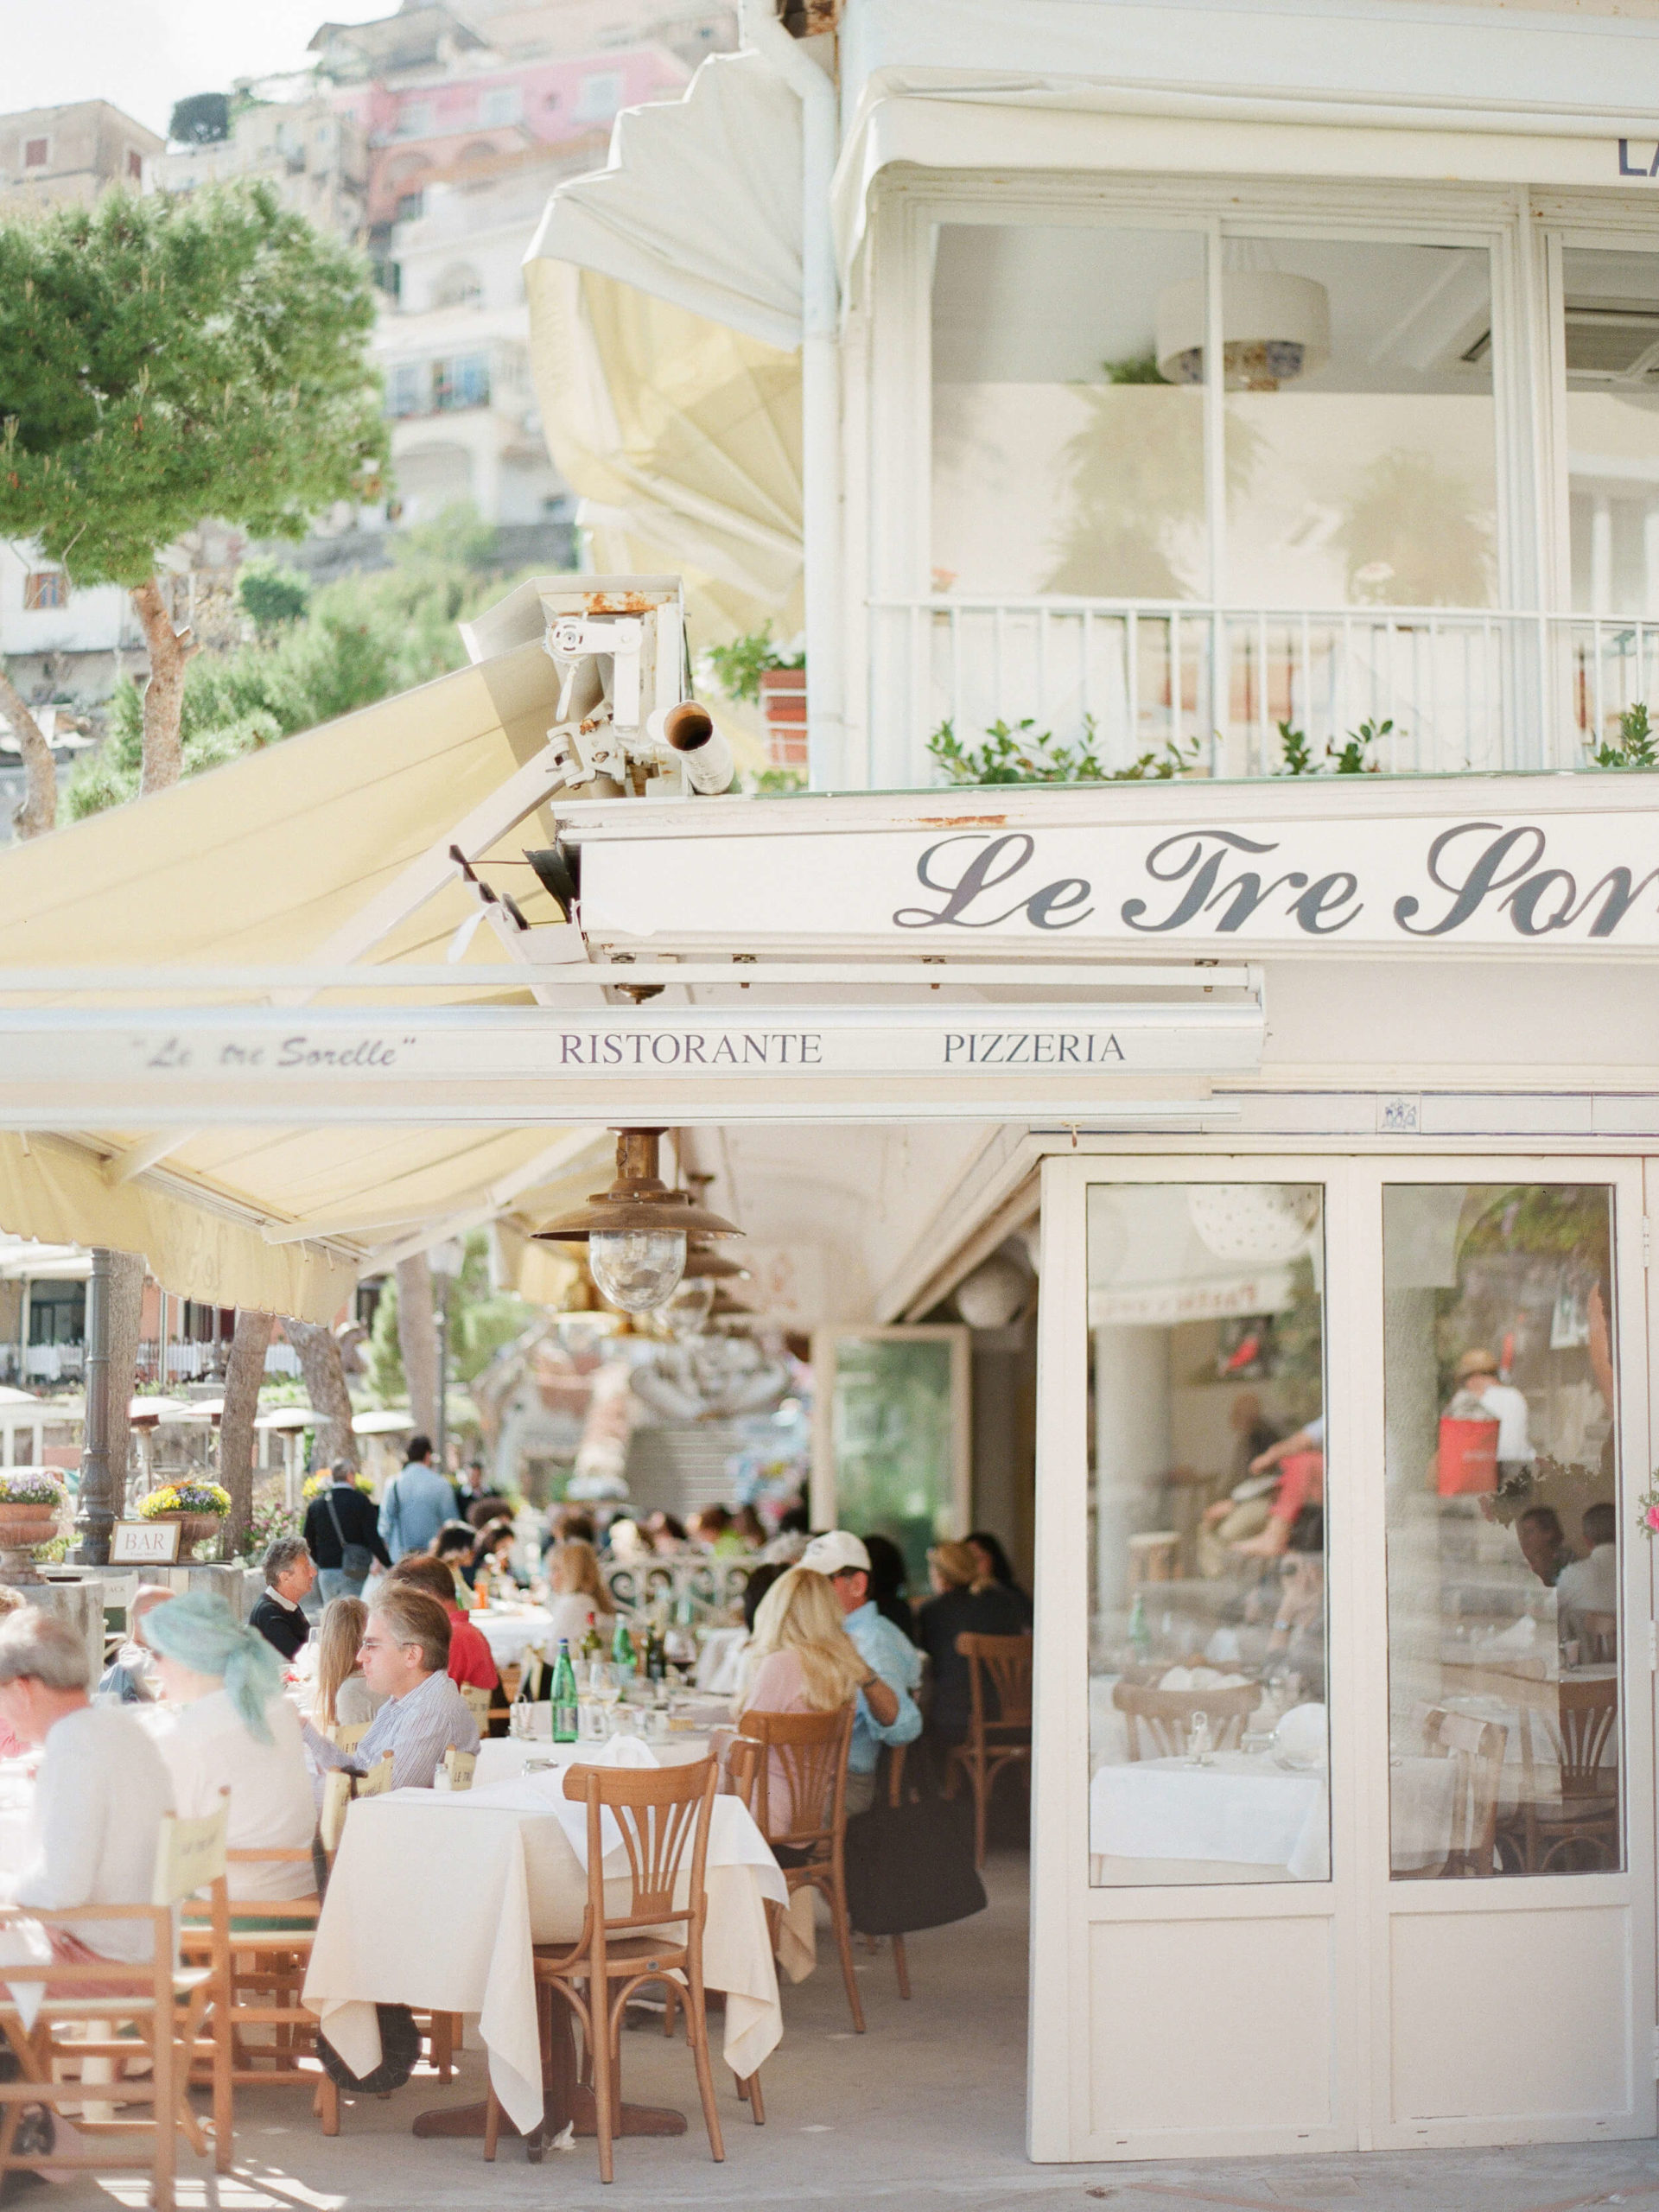 Cafe in Positano, Italy from 72 hours on the Amalfi Coast travel guide